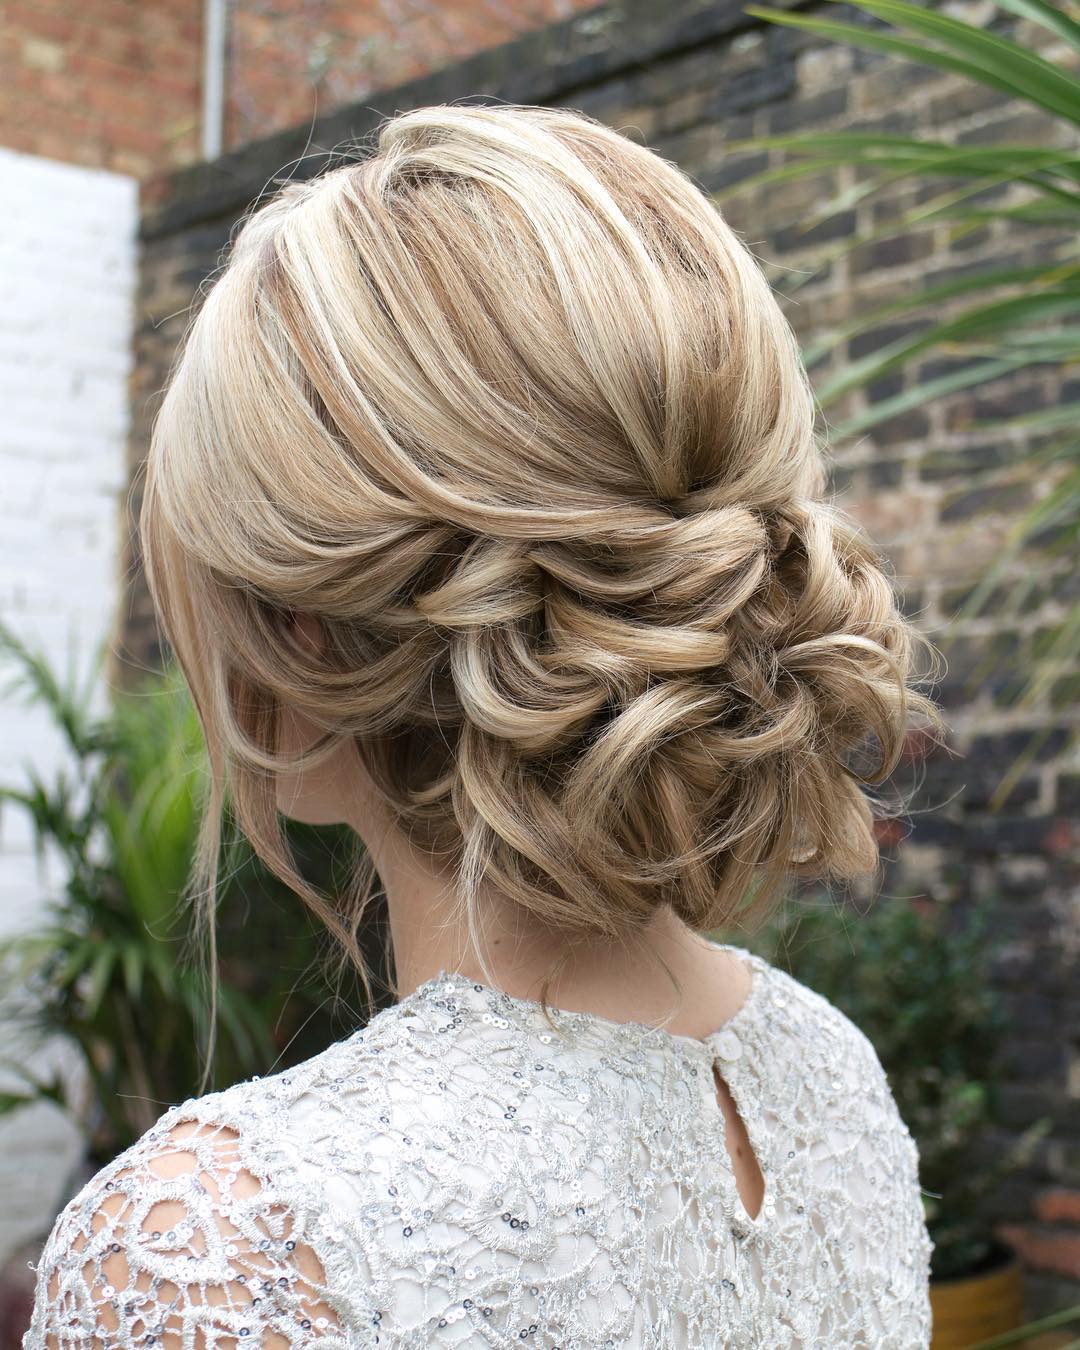 10 Gorgeous Prom Updos for Long Hair, Prom Updo Hairstyles 2020